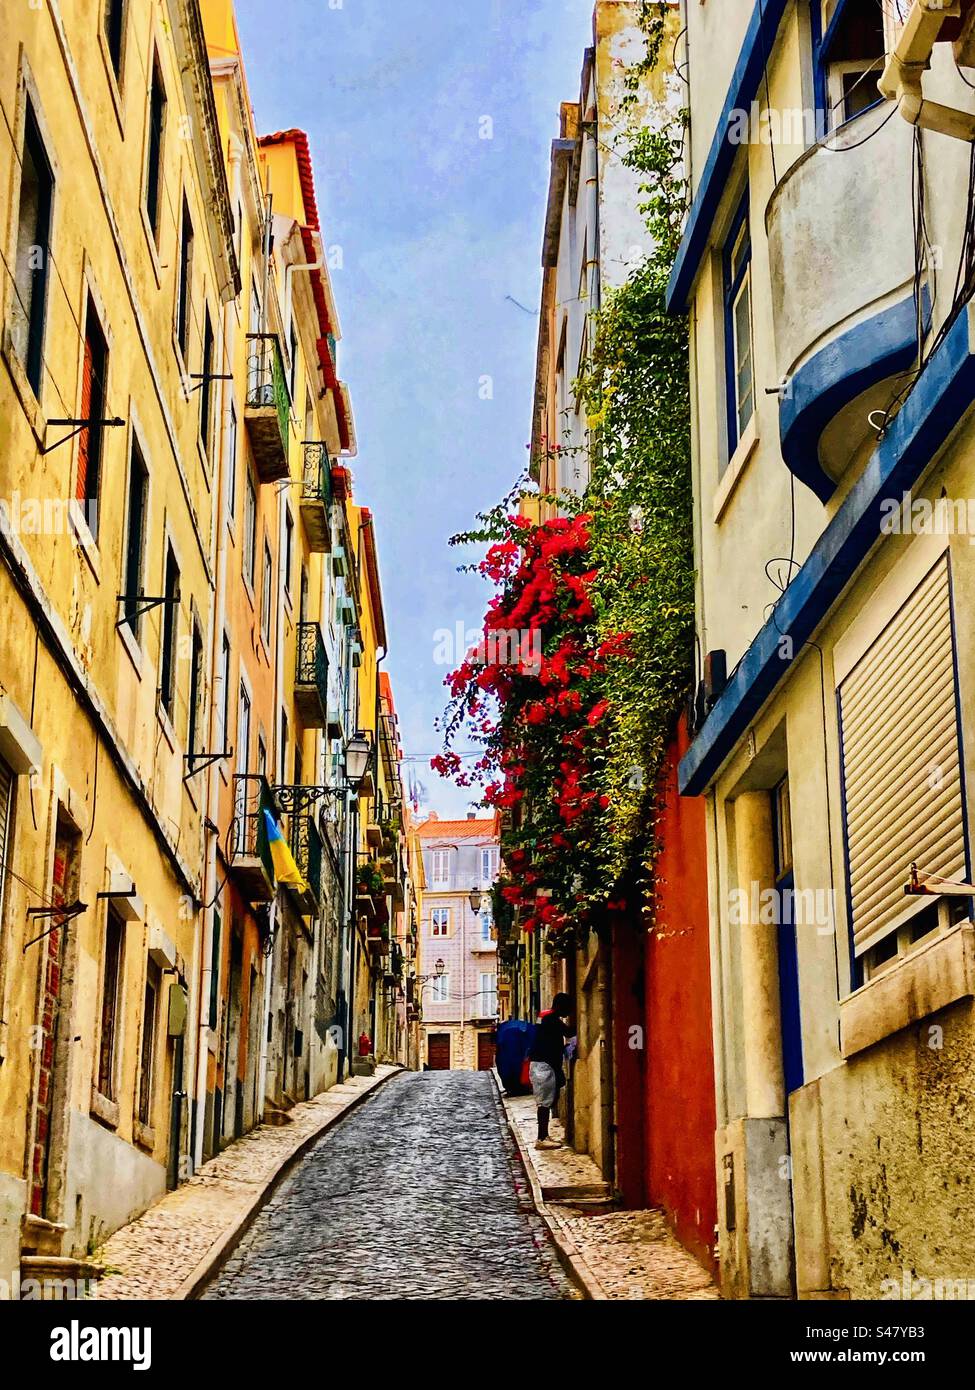 Typical Lisbon steep street with yellow house Stock Photo